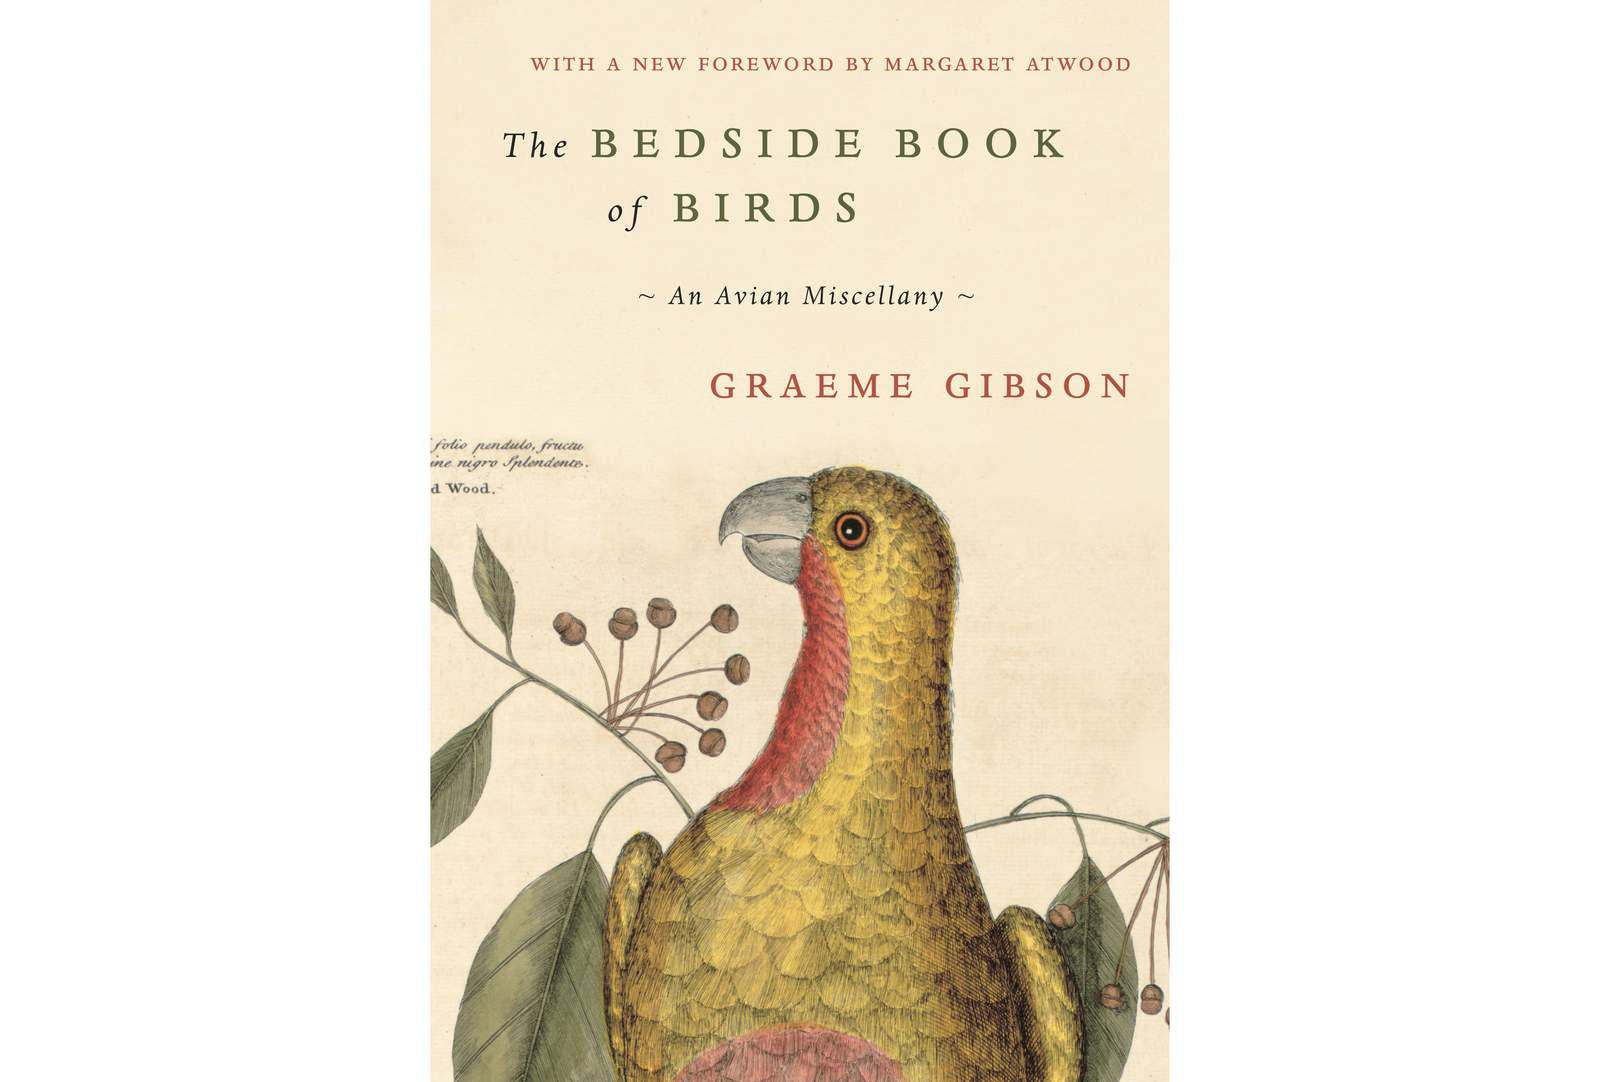 Birds as revelations: Atwood writes foreword for Gibson book